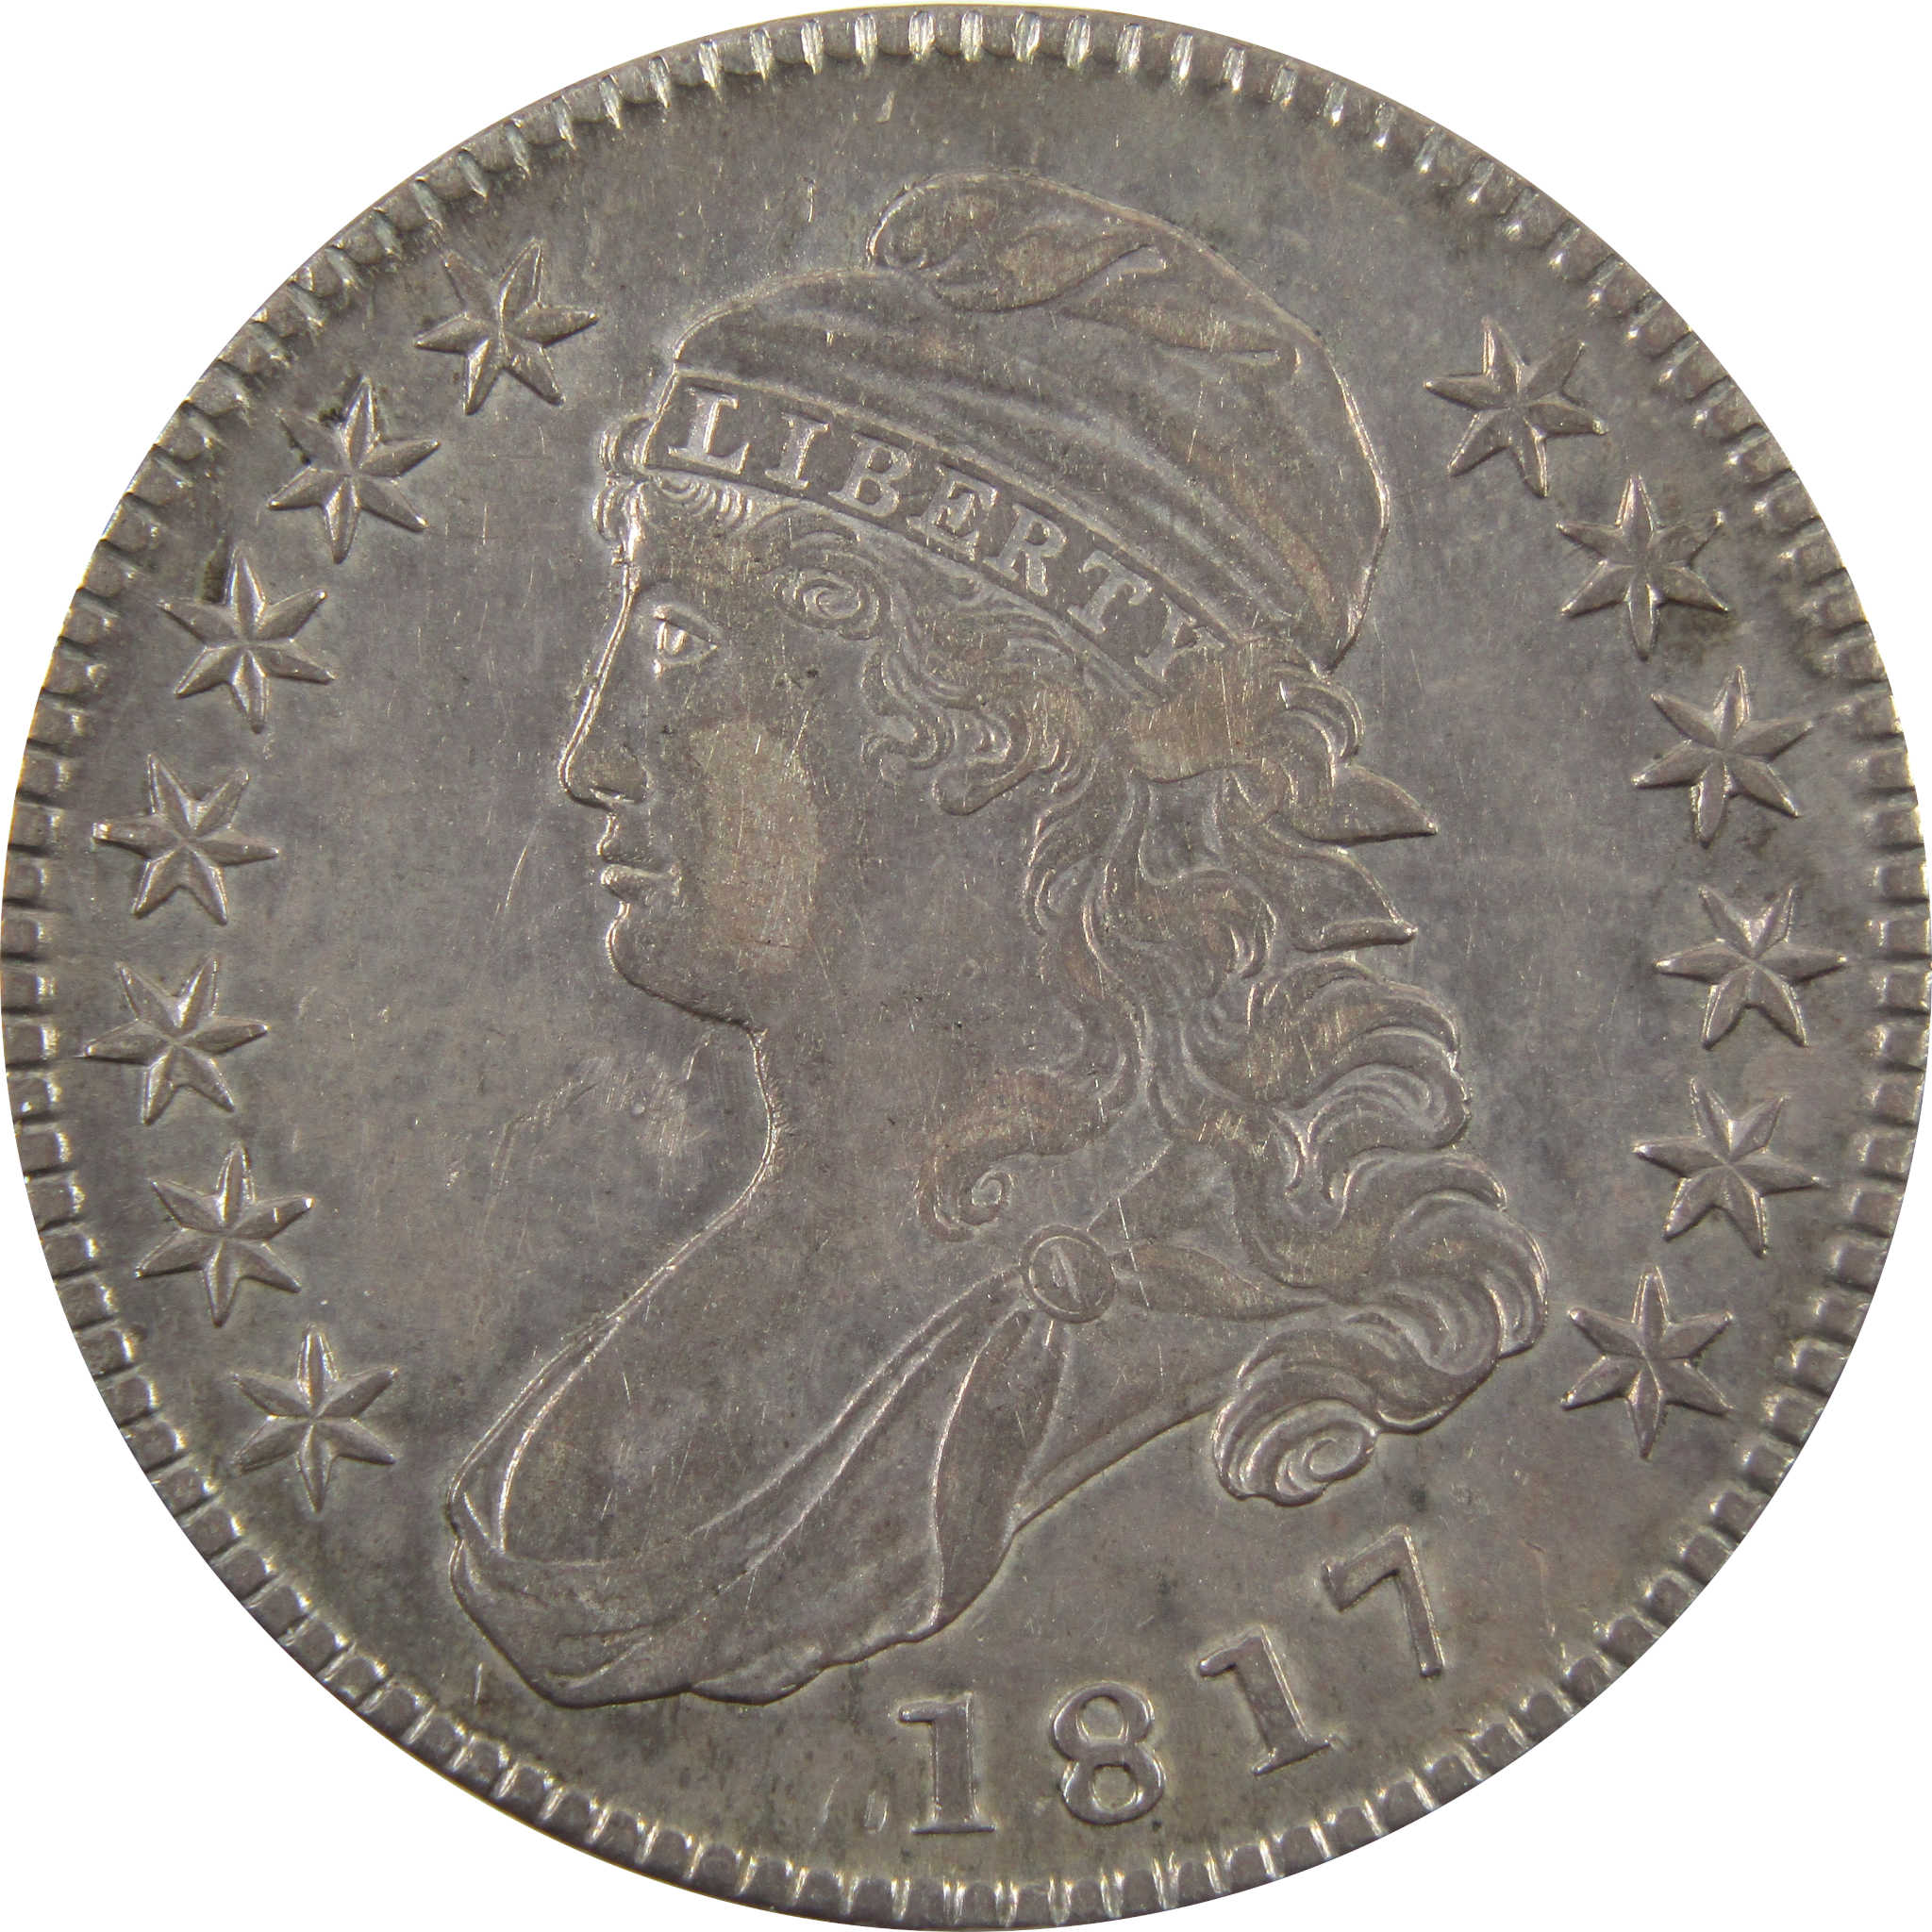 Capped Bust Half Dollars